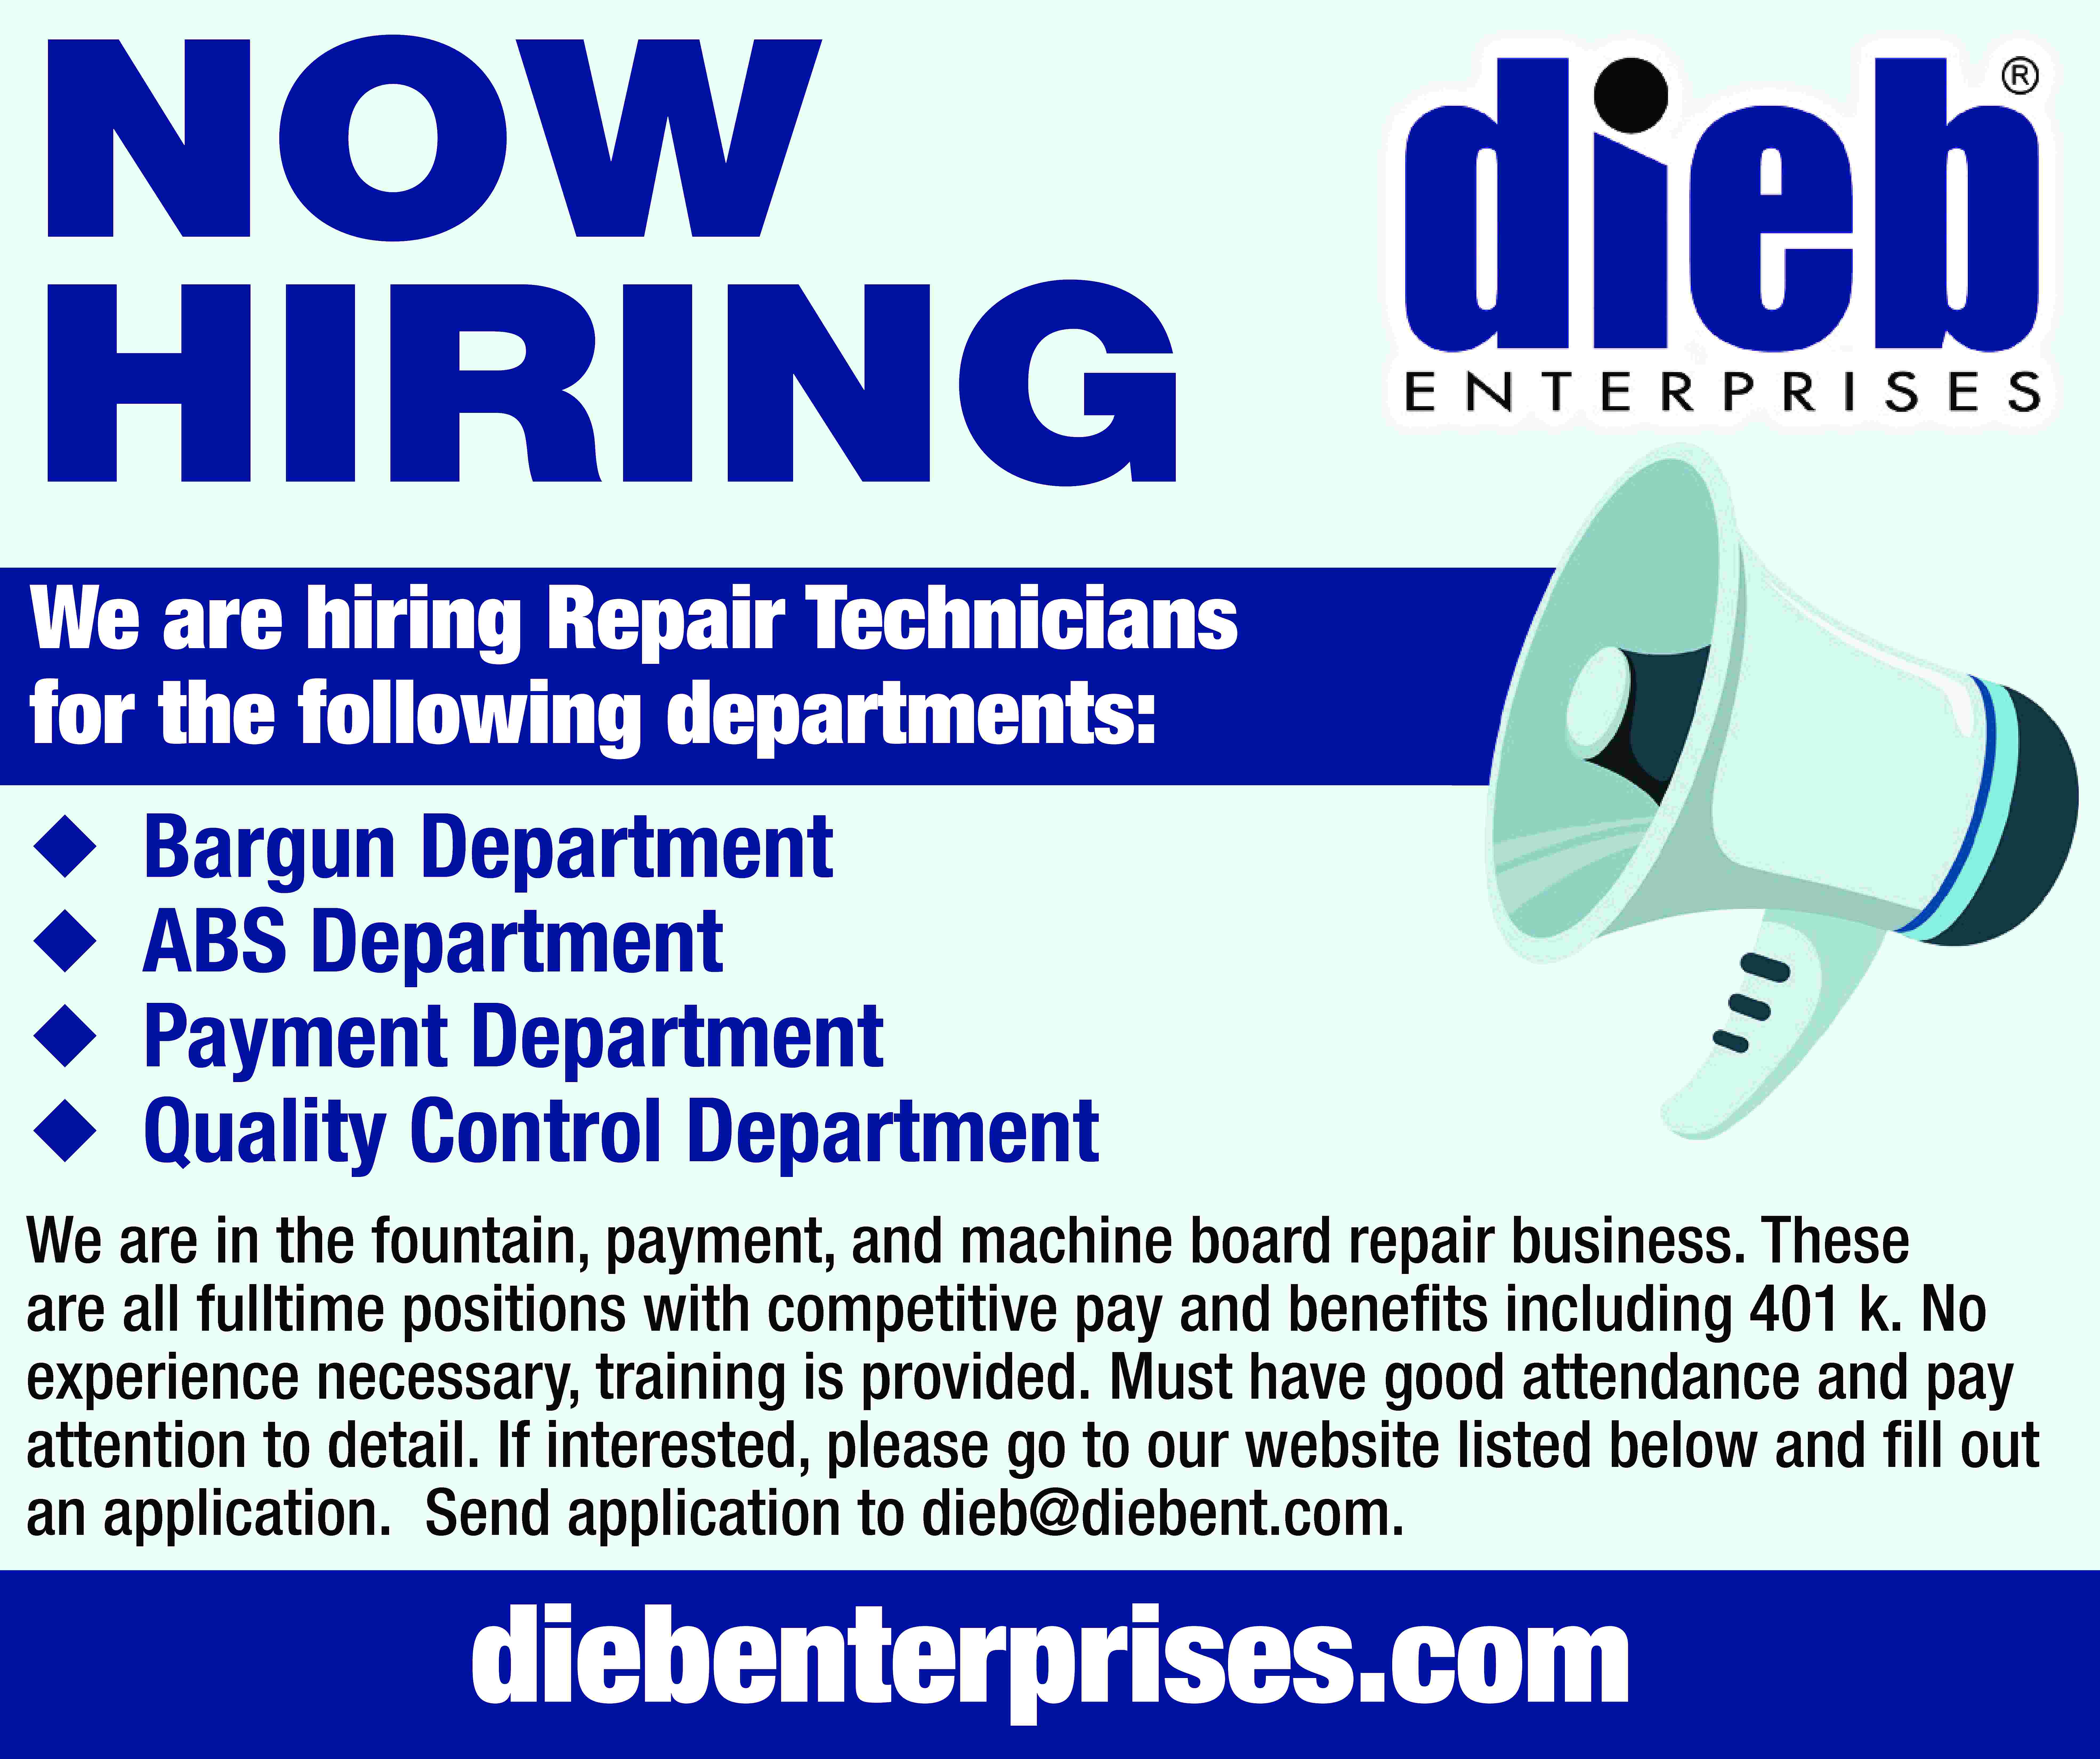 NOW HIRING We are hiring  NOW HIRING We are hiring Repair Technicians for the following departments:     Bargun Department ABS Department Payment Department Quality Control Department We are in the fountain, payment, and machine board repair business. These are all fulltime positions with competitive pay and benefits including 401 k. No experience necessary, training is provided. Must have good attendance and pay attention to detail. If interested, please go to our website listed below and fill out an application. Send application to dieb@diebent.com. diebenterprises.com